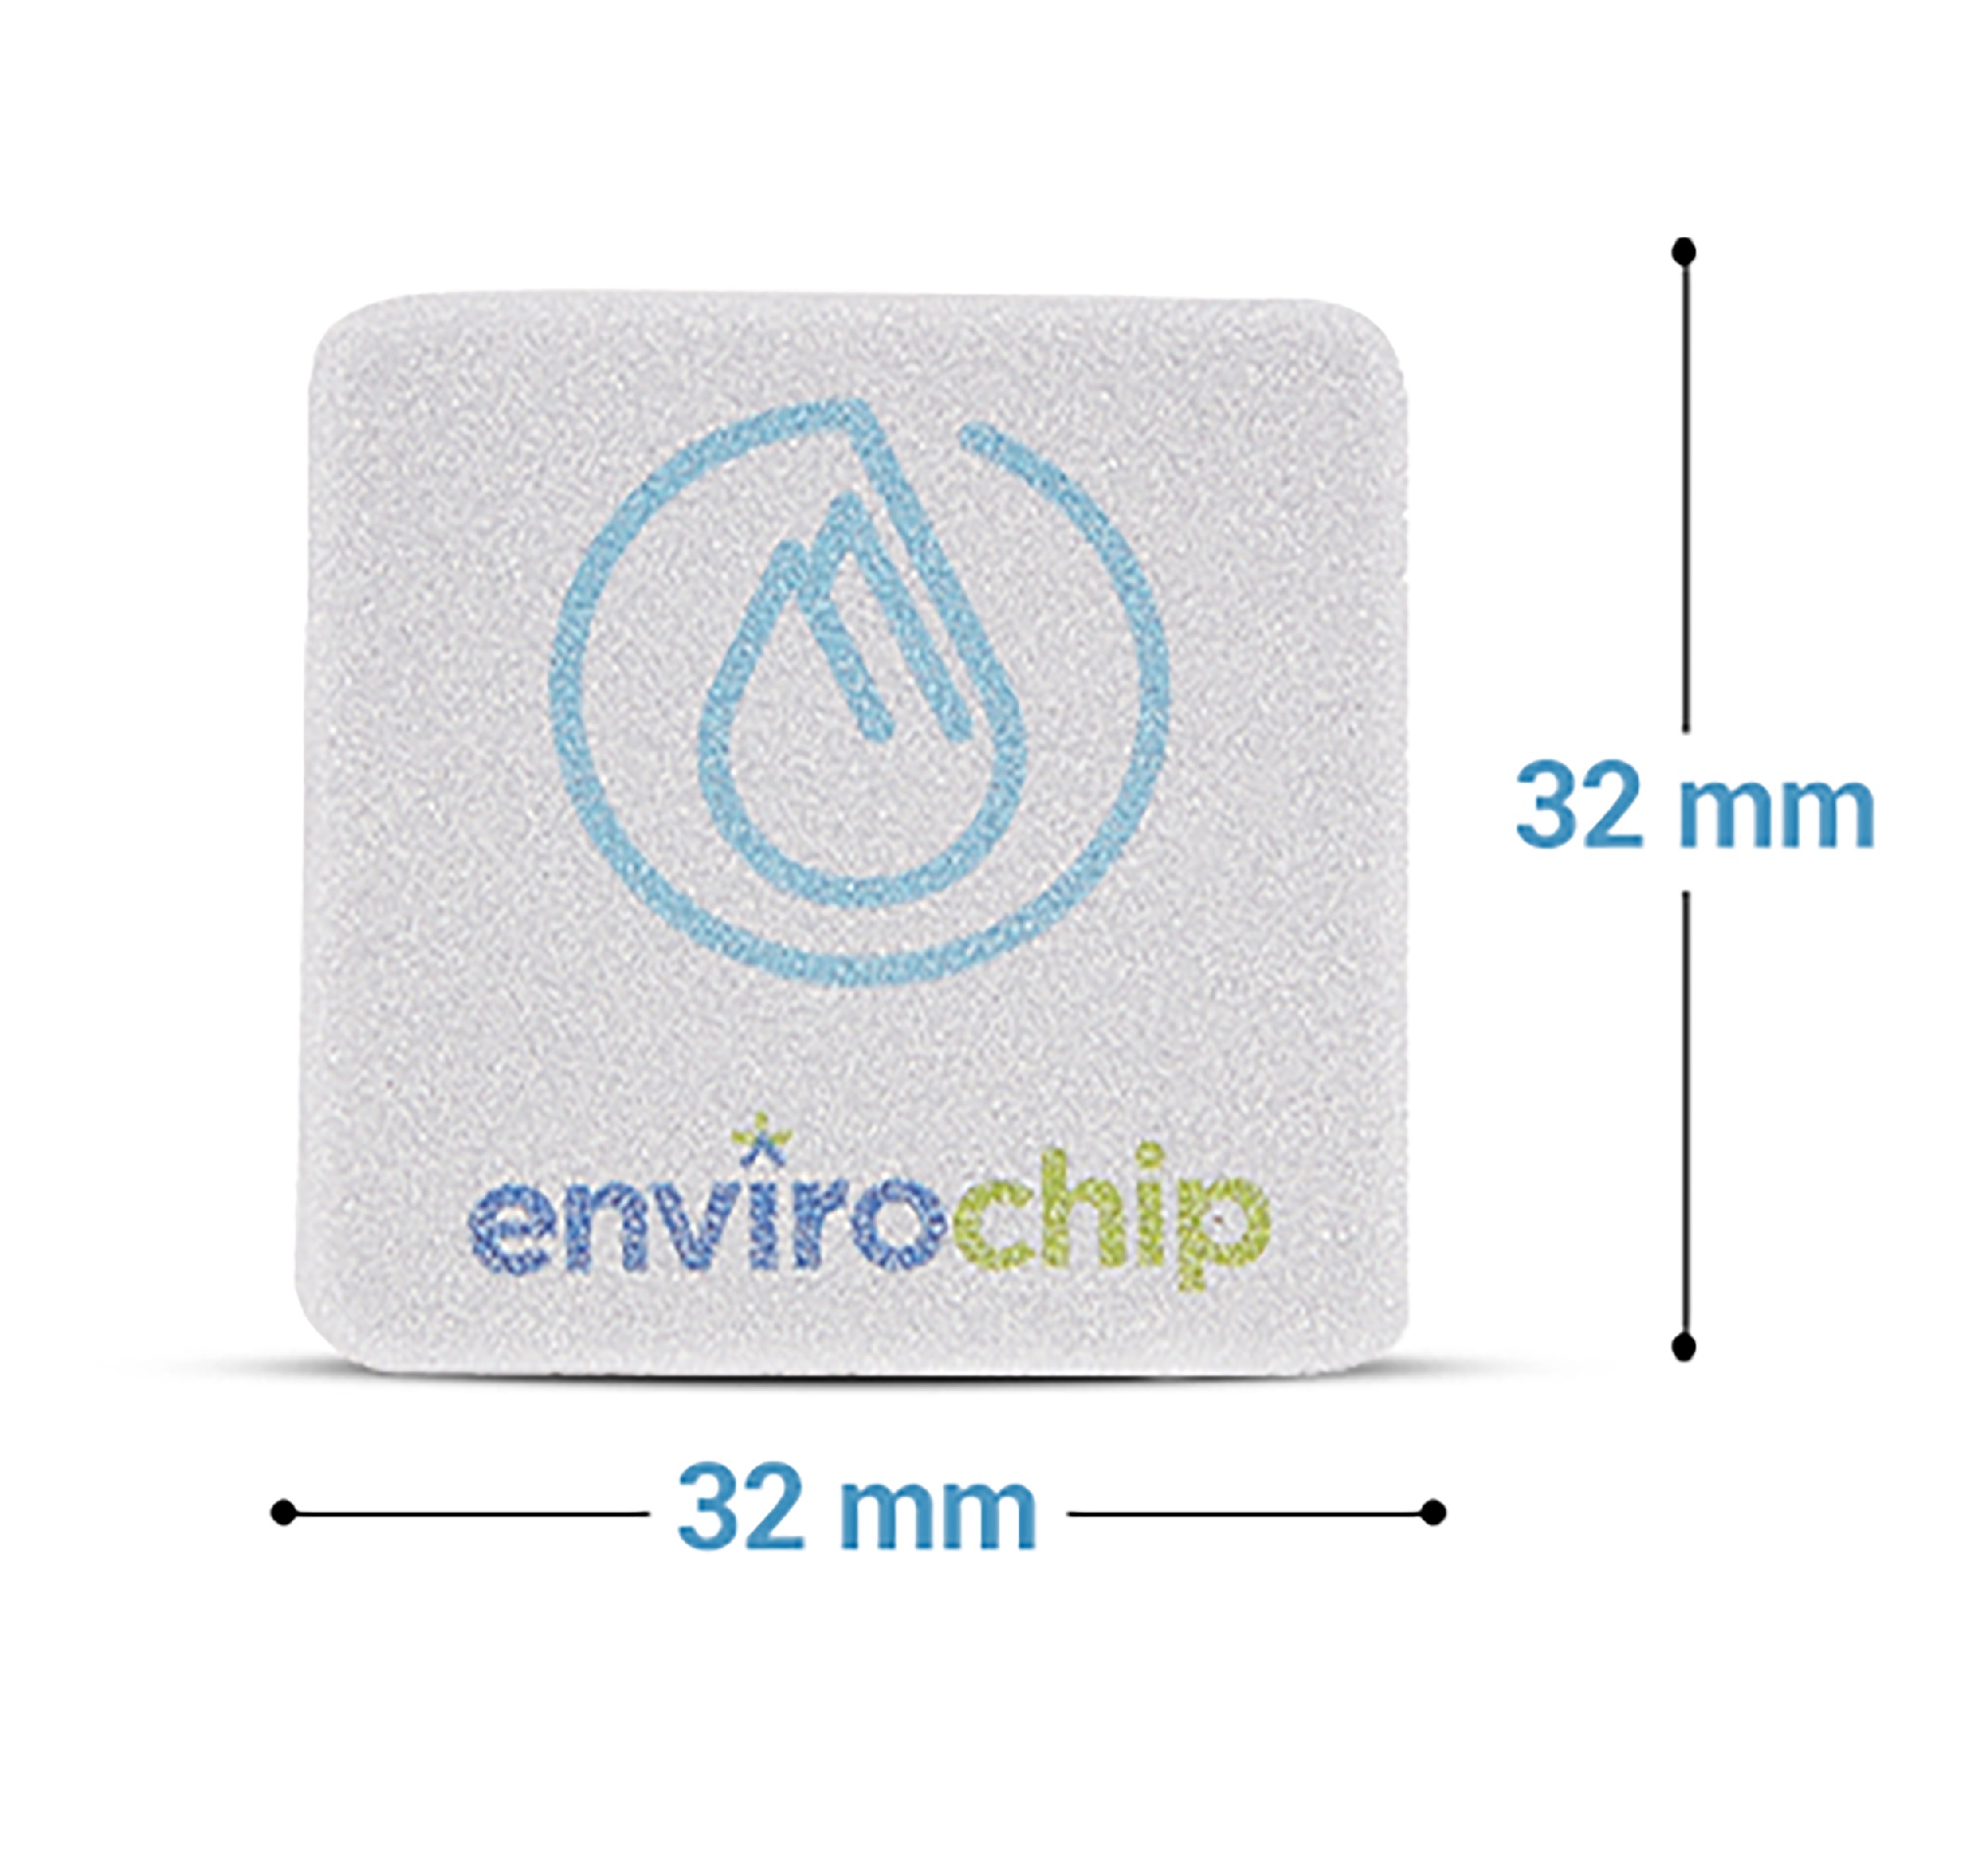 envirochip-clinically-tested-patented-anti-radiation-chip-for-tablet-wi-fi-router-pc-monitor-elements-design-water-silver